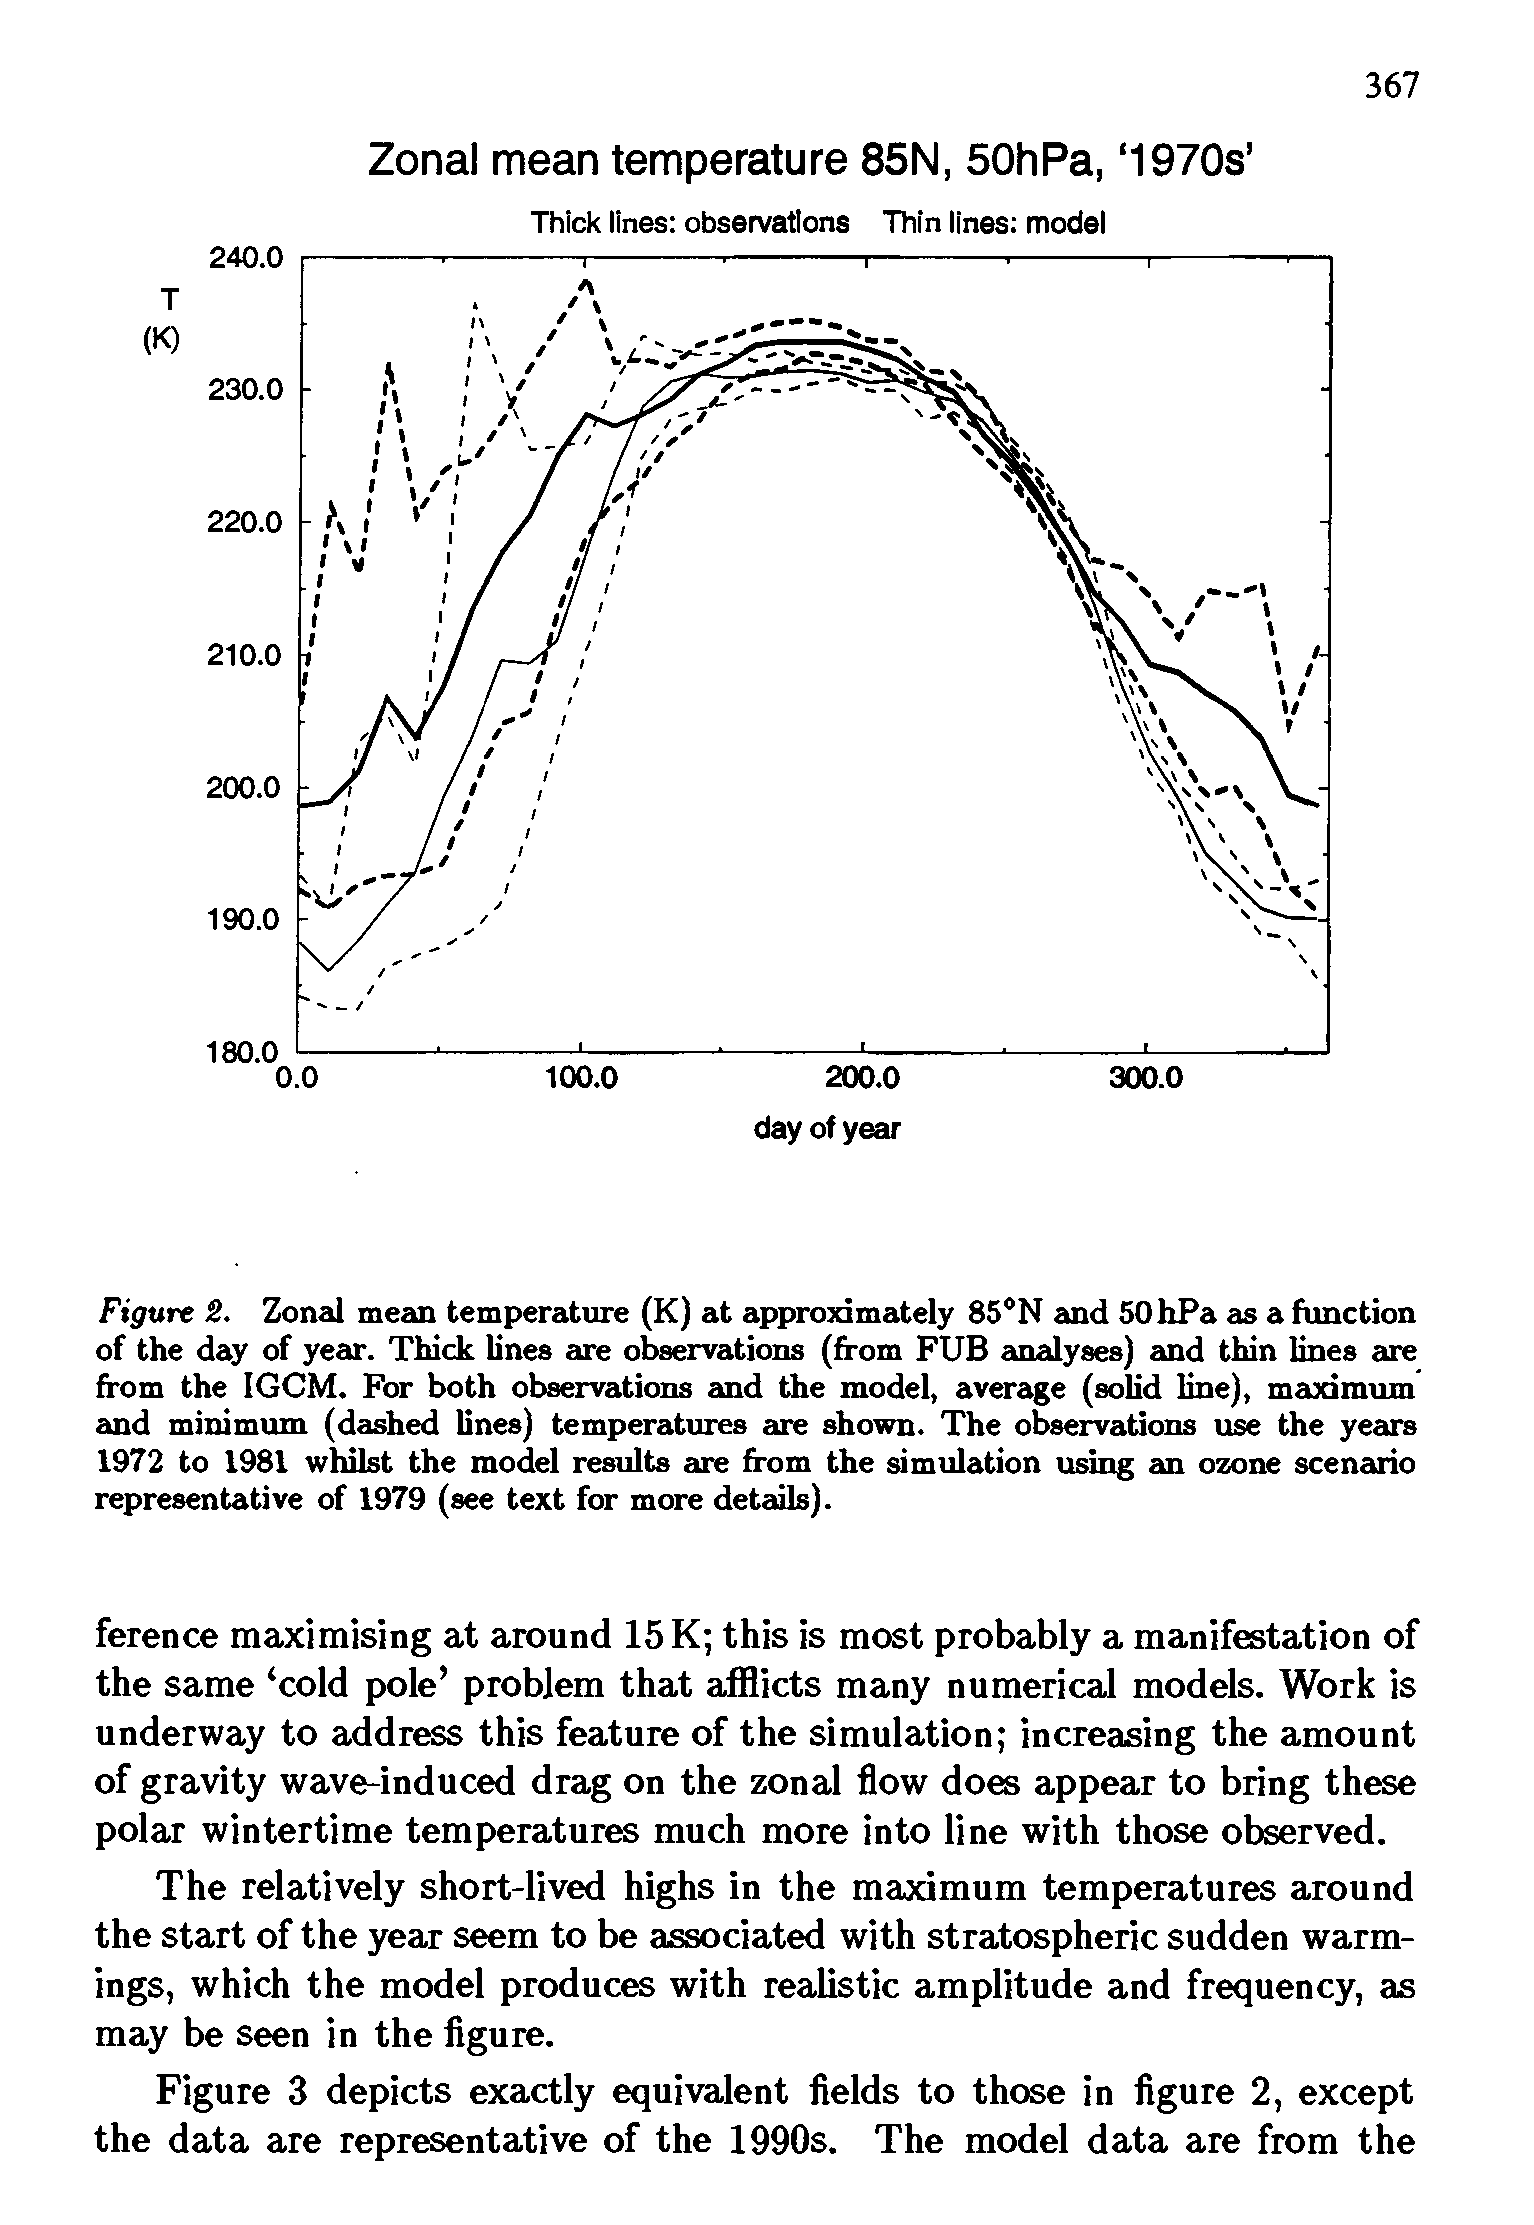 Figure 2. Zonal mean temperature (K) at approximately 85°N and SOhPa as a function of the day of year. Thick lines are observations (from FUB analyses) and thin lines are from the IGCM. For both observations and the model, average (solid line), maximum and minimum (dashed lines) temperatures are shown. The observations use the years 1972 to 1981 whilst the model results are from the simulation using an ozone scenario representative of 1979 (see text for more details).